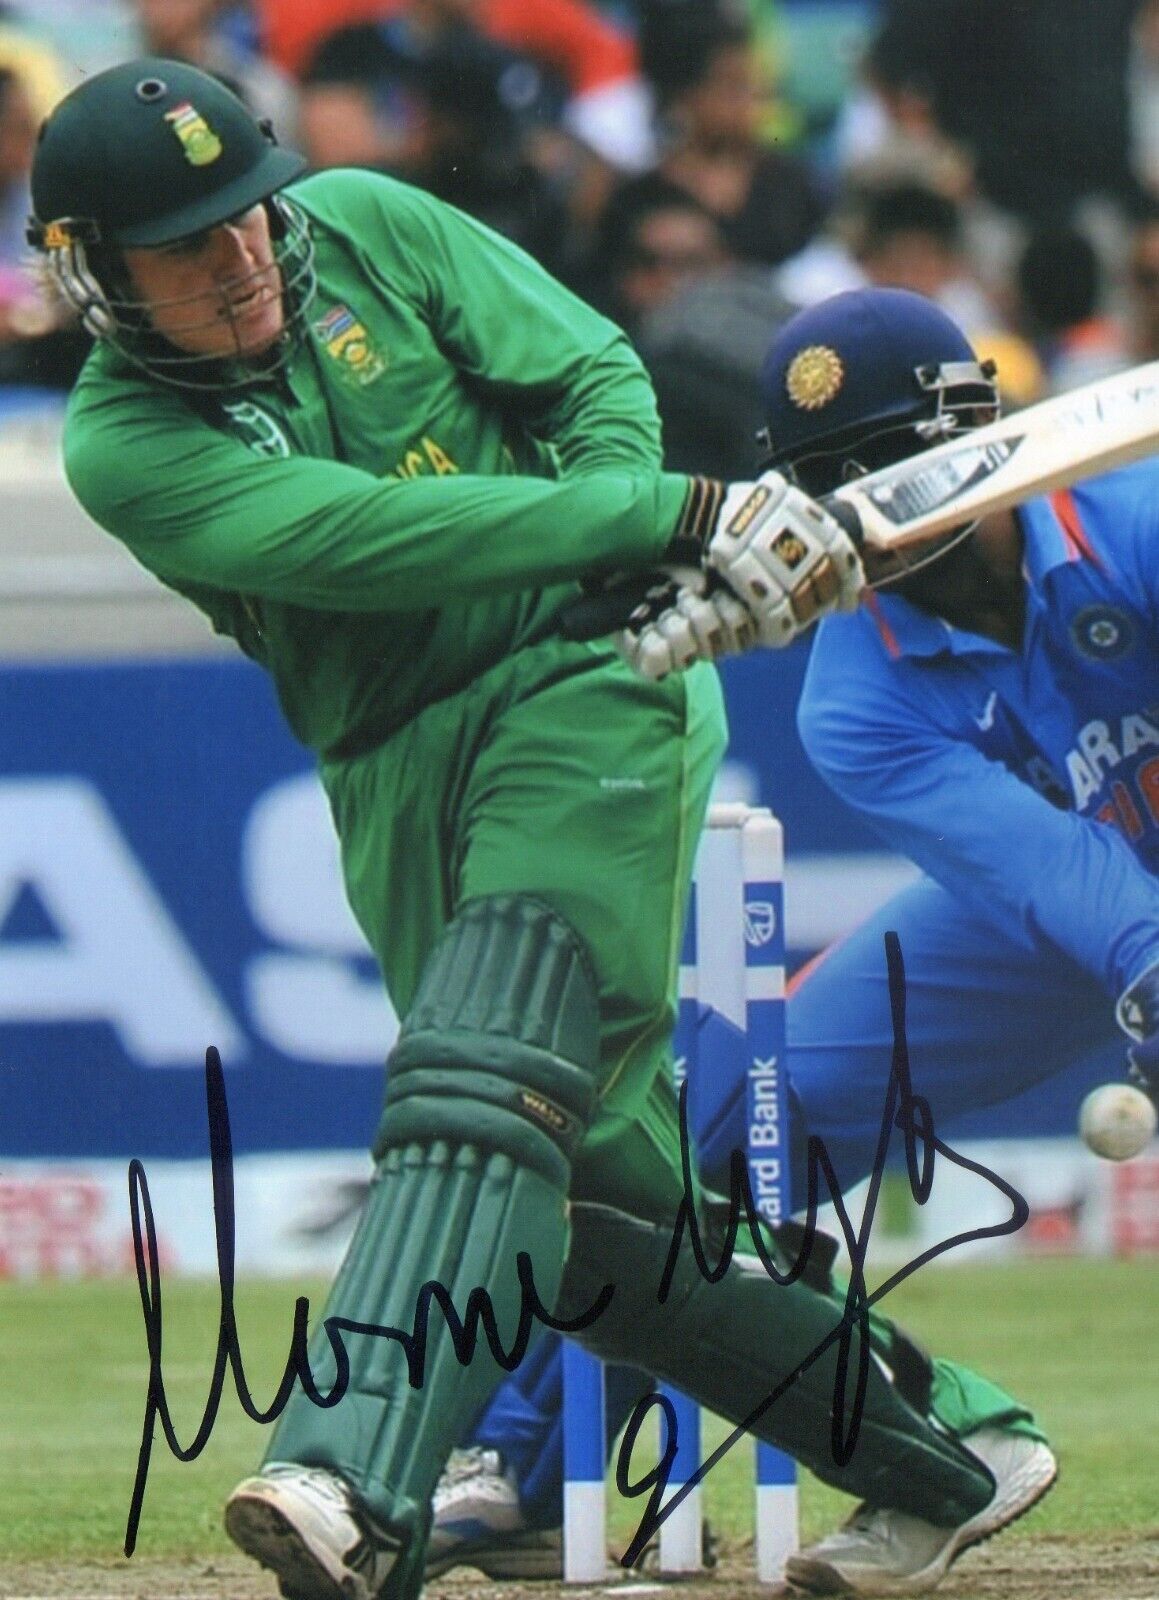 5x7 Original Autographed Photo of South African Cricketer Morné van Wyk